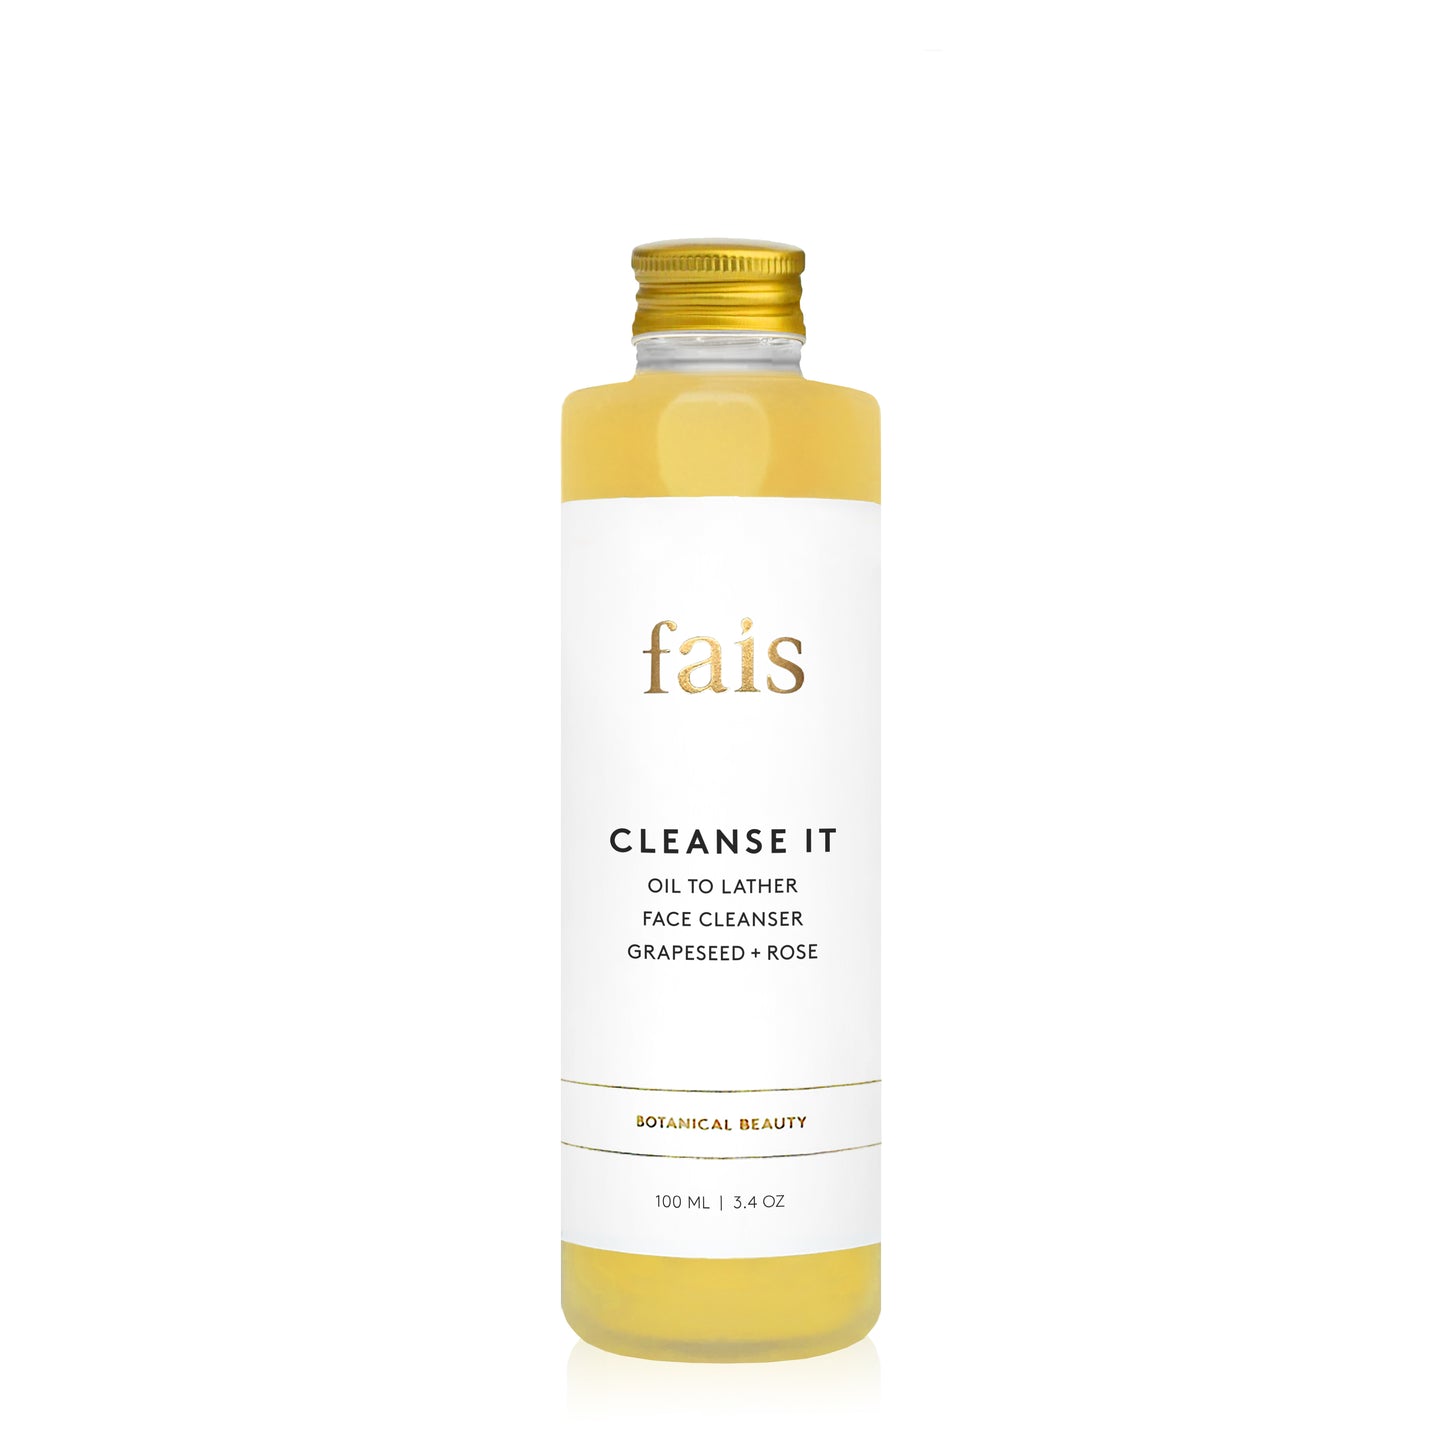 Cleanse It Oil To Lather Face Cleanser Grapeseed + Rose